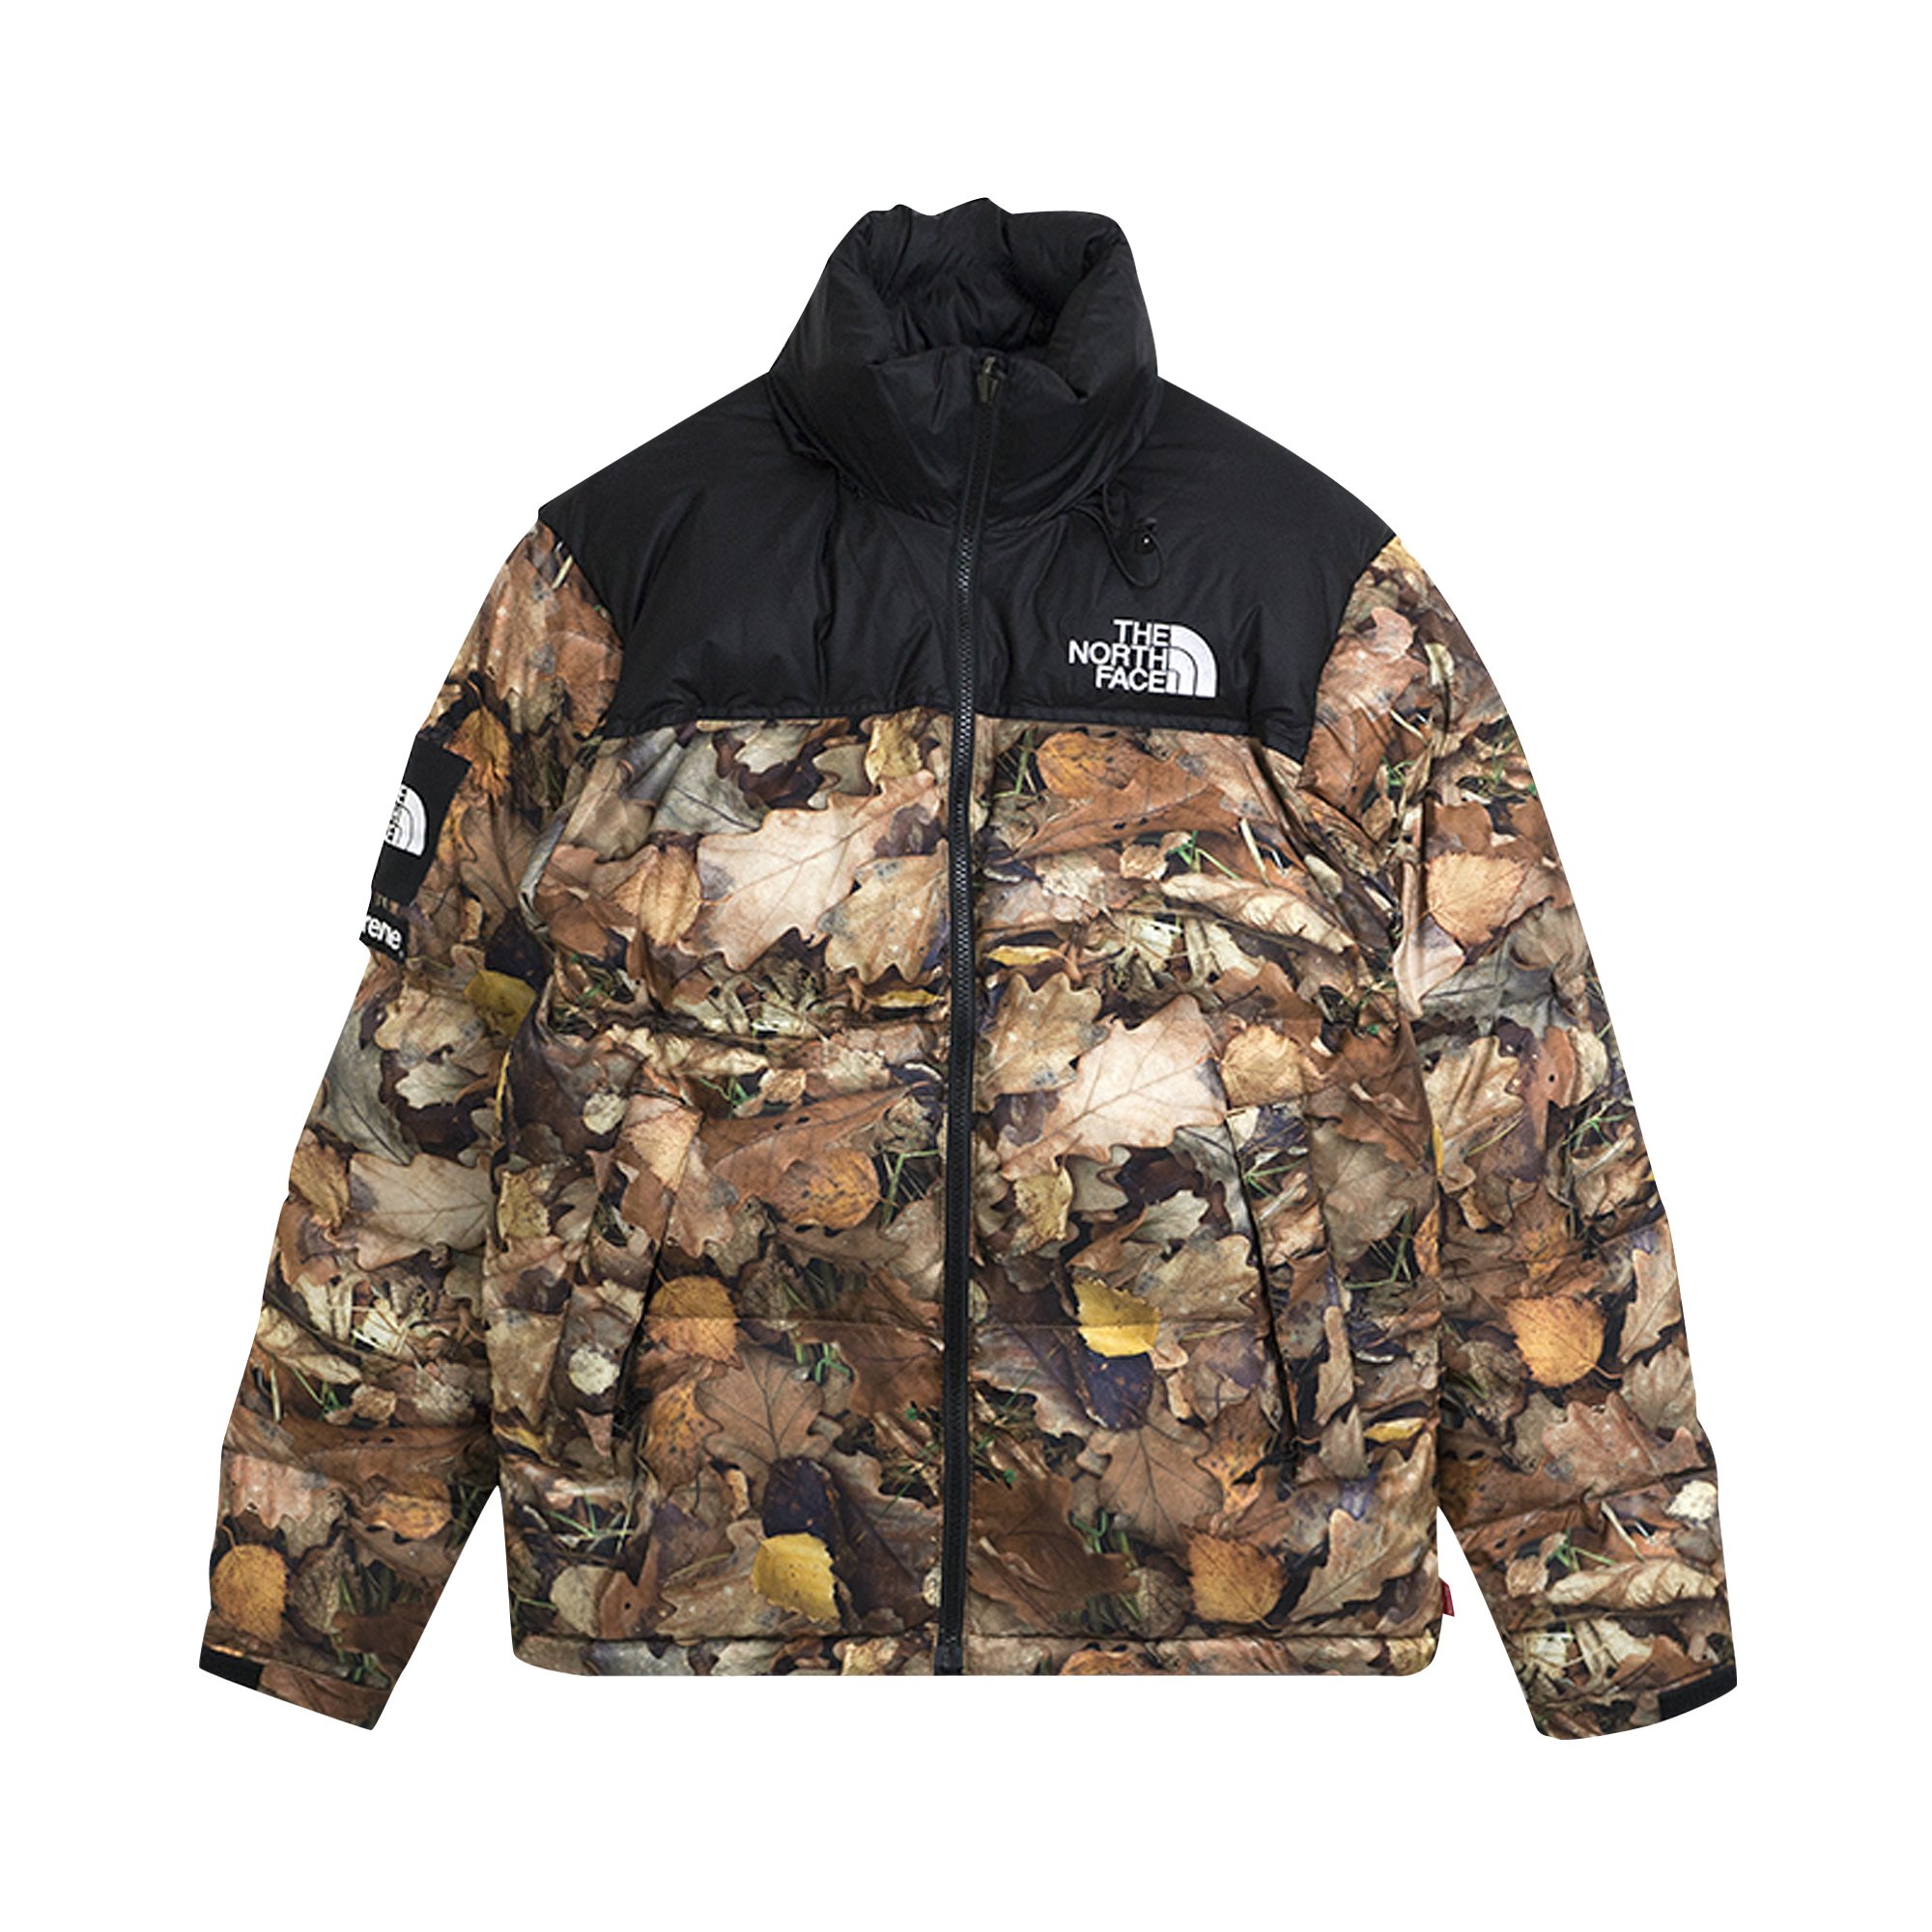 Supreme x The North Face Nupste 'Leaves' | GOAT